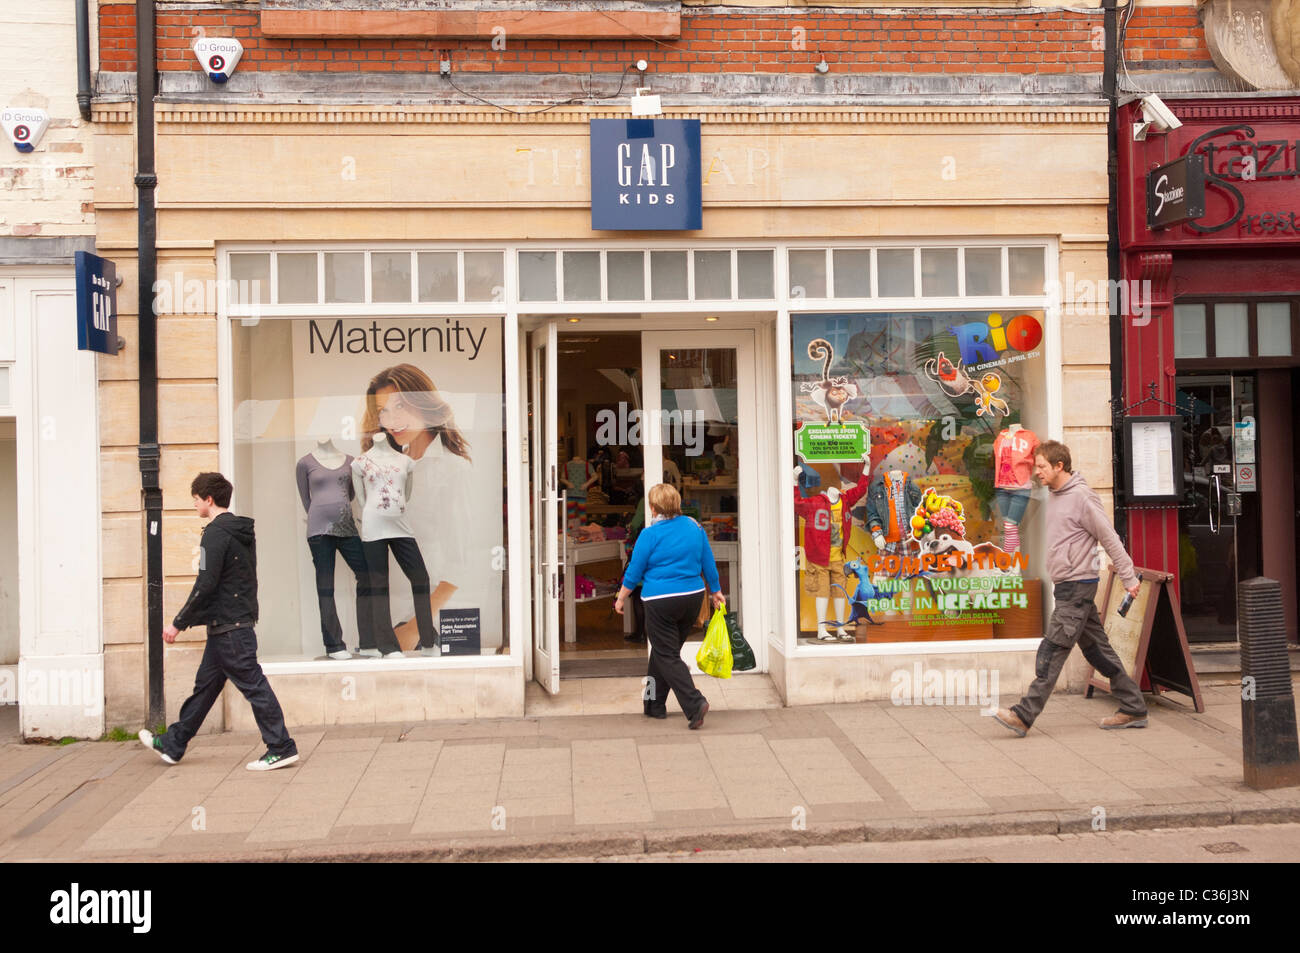 Kids Clothes Shop High Resolution Stock Photography and Images - Alamy